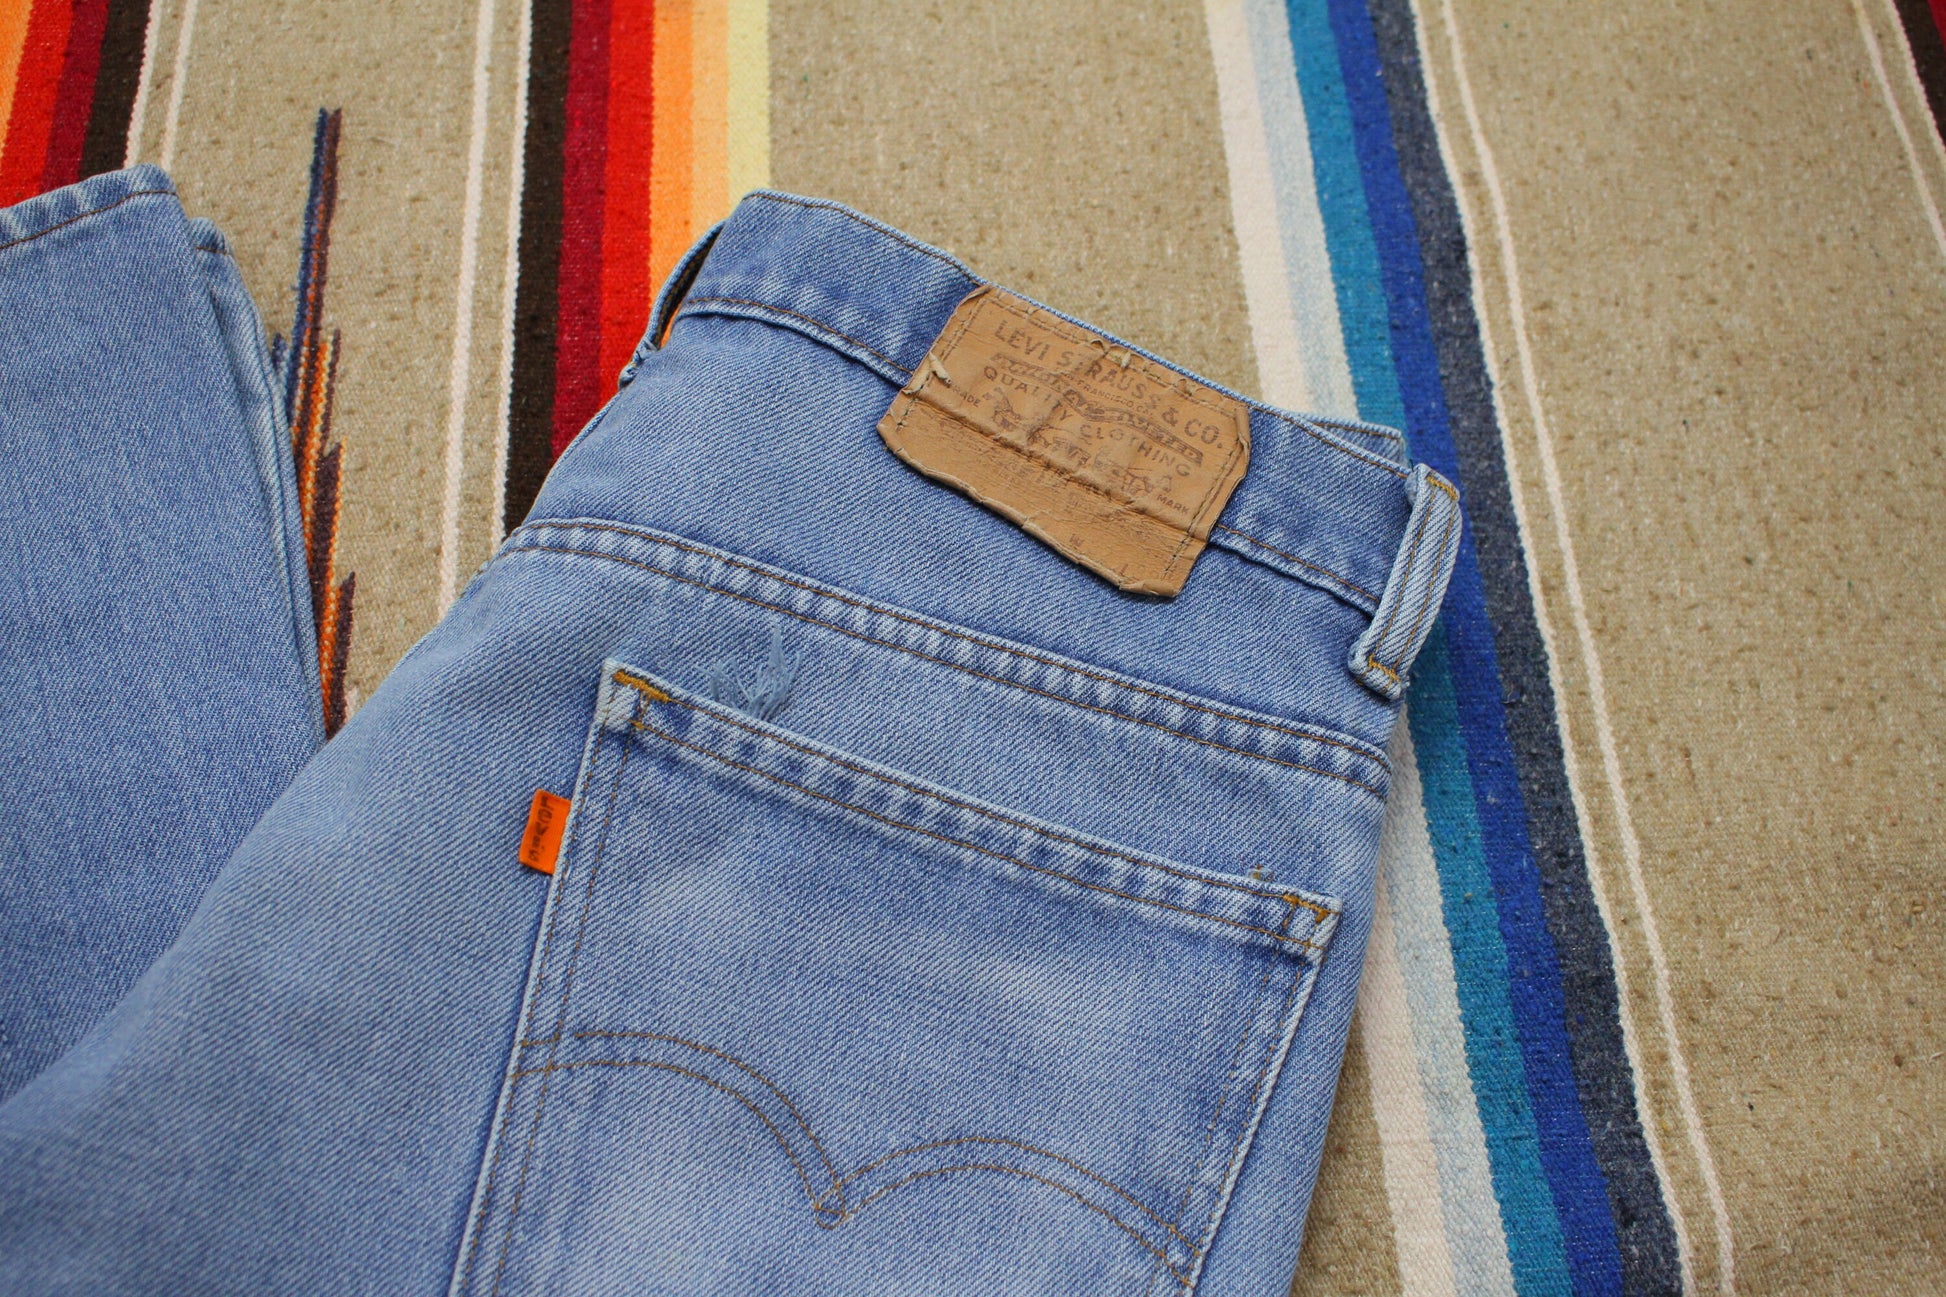 1970s Levi's Orange Tab 517 Faded Blue Denim Jeans Made in USA Size 31x31